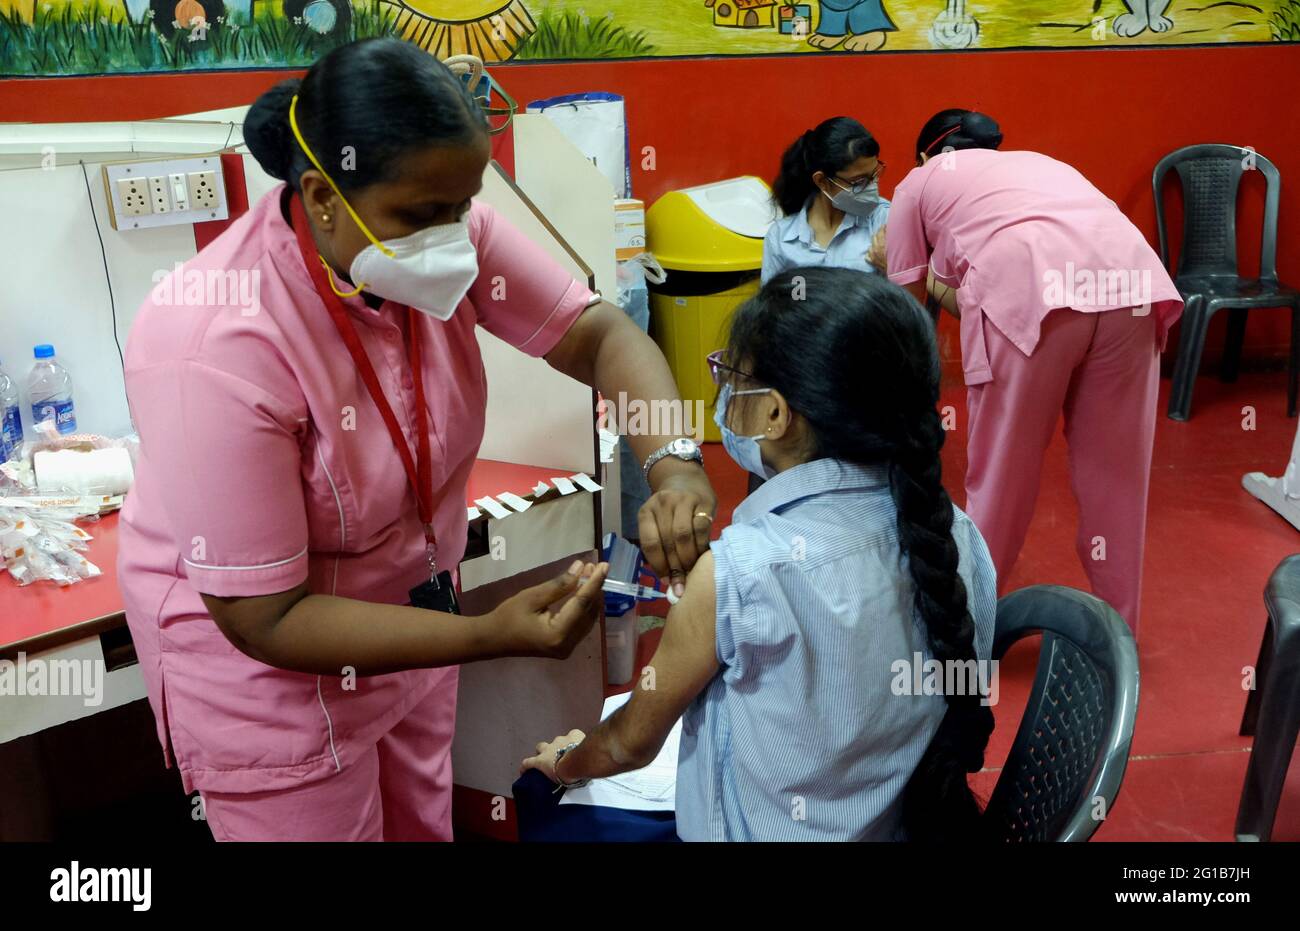 Kolkata, India. 6th June, 2021. Students of a private school receive the COVID-19 vaccine in Kolkata, India, on June 6, 2021. India's COVID-19 tally rose to 28,809,339 on Sunday with 114,460 new cases reported in the past 24 hours, the lowest single-day increase in the past two-months, said the federal health ministry. India's nationwide vaccination drive started on Jan. 16, and over 231 million vaccination doses have been administered so far. Credit: Str/Xinhua/Alamy Live News Stock Photo